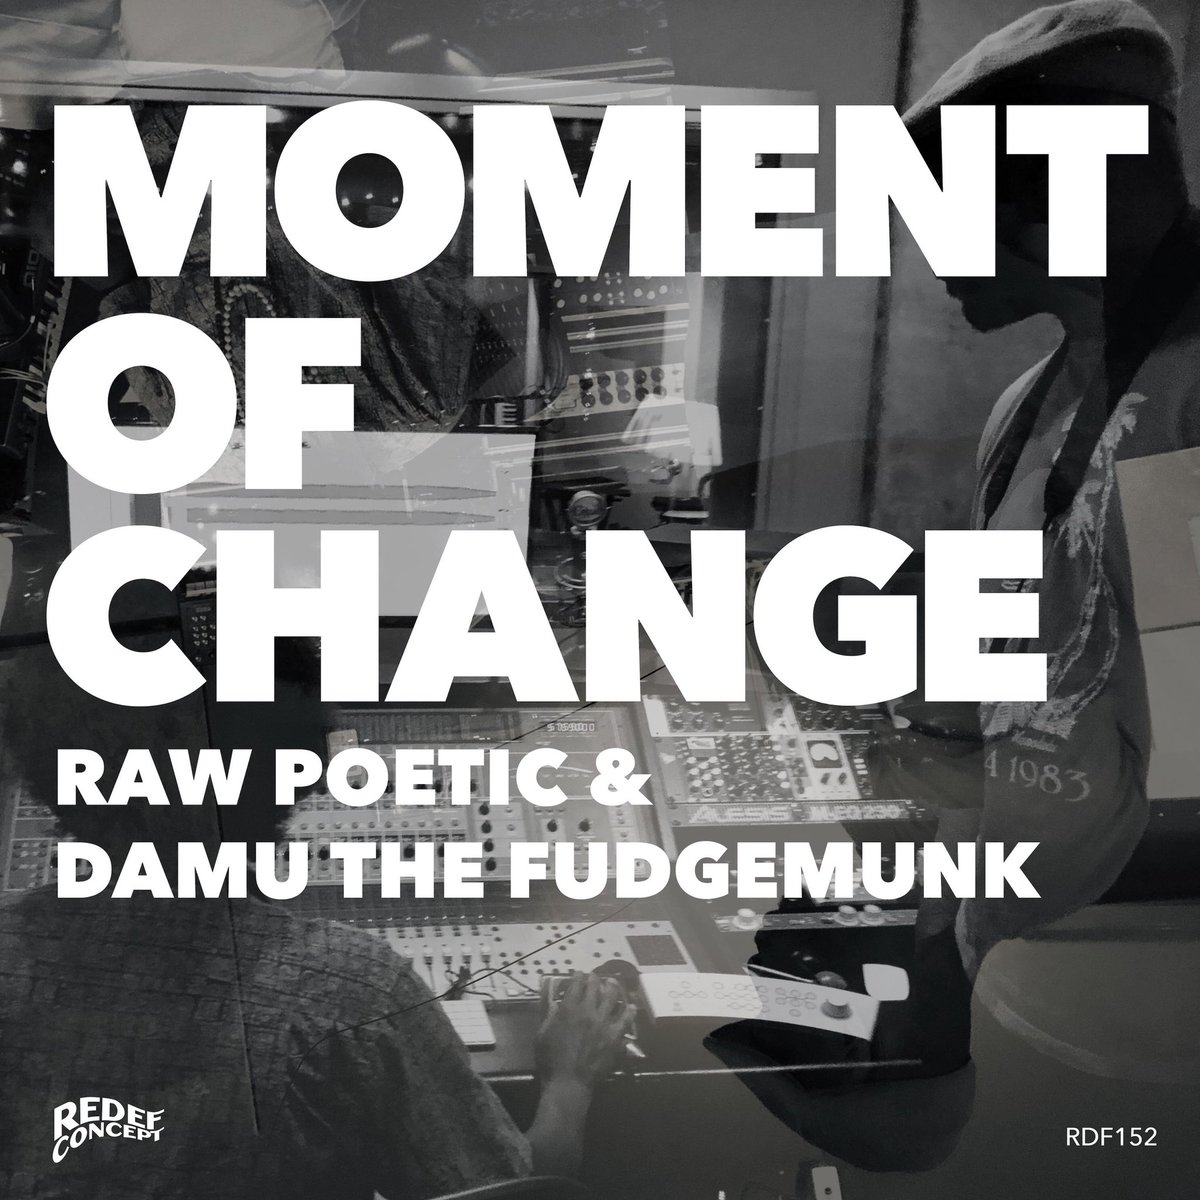 96. Raw Poetic & Damu The Fudgemunk - Moment of Change (this feels very out of time. Imagine we are back in 2002 and listening to J5 and Blackalicious again)